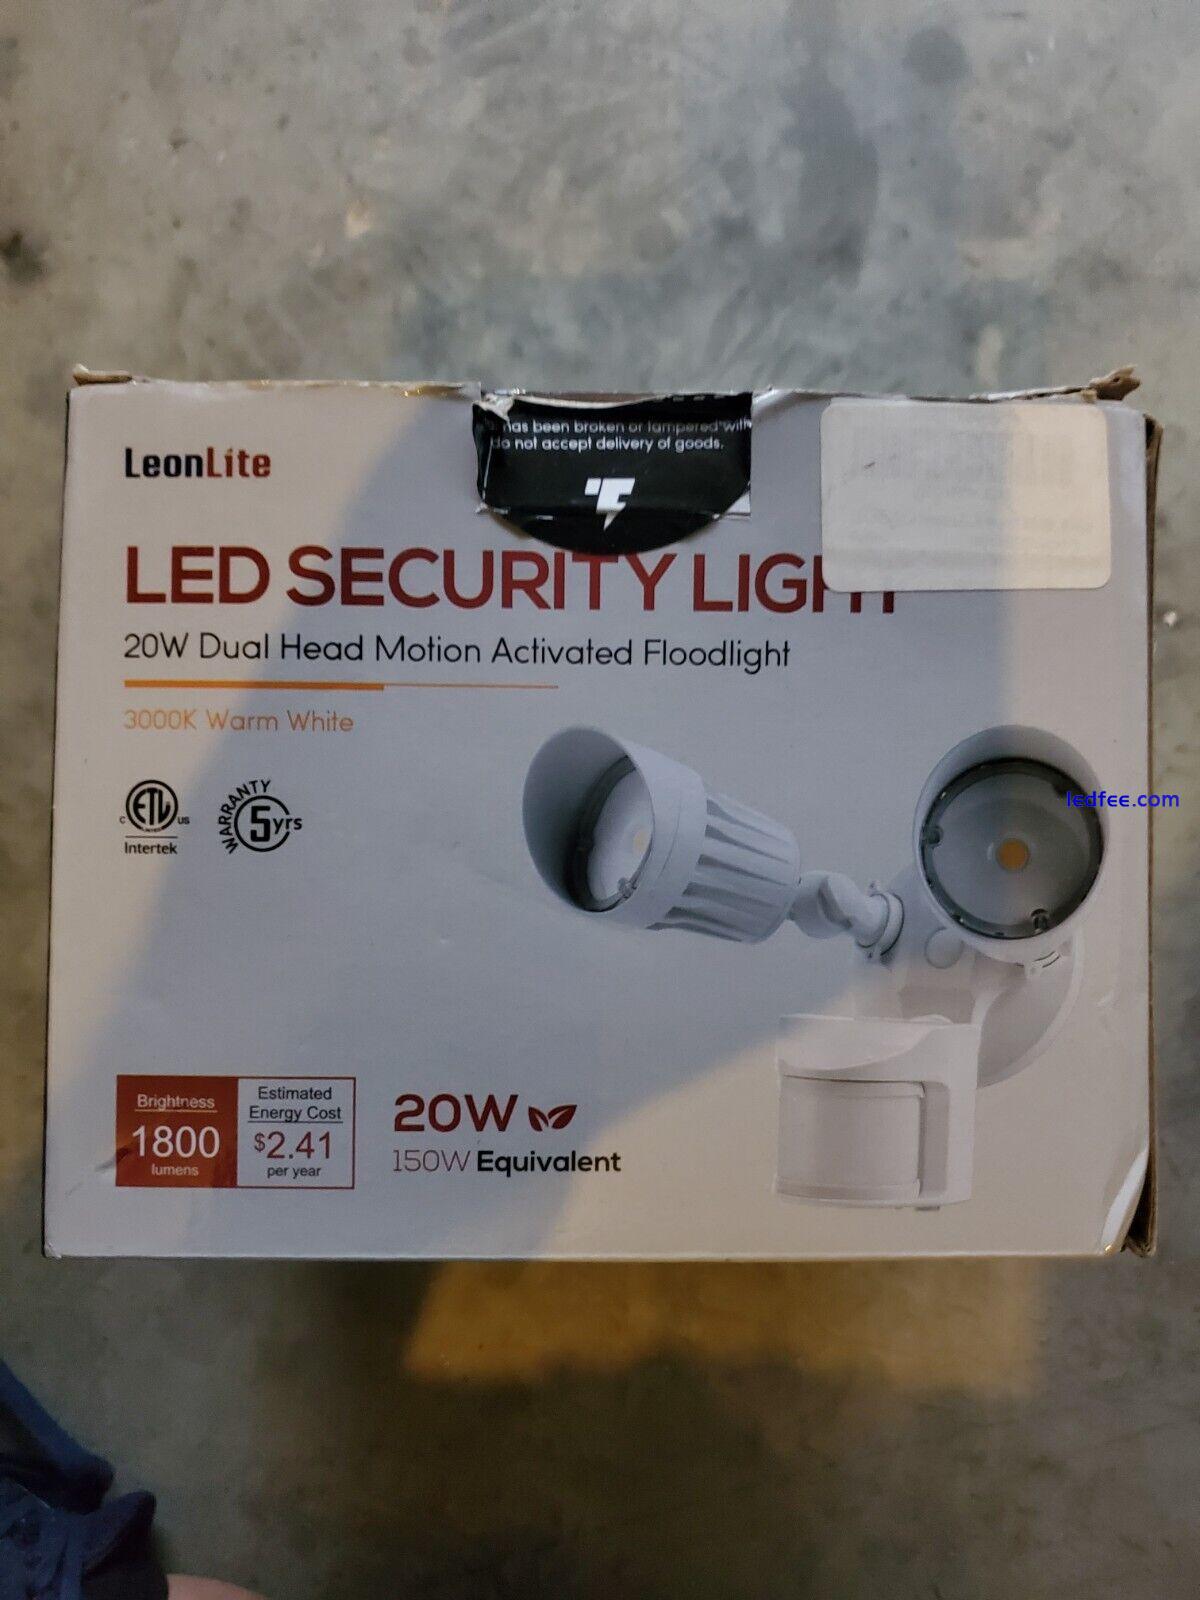 Leonlite LED Security Light 20W Dual Head Motion Activated Floodlight 4 